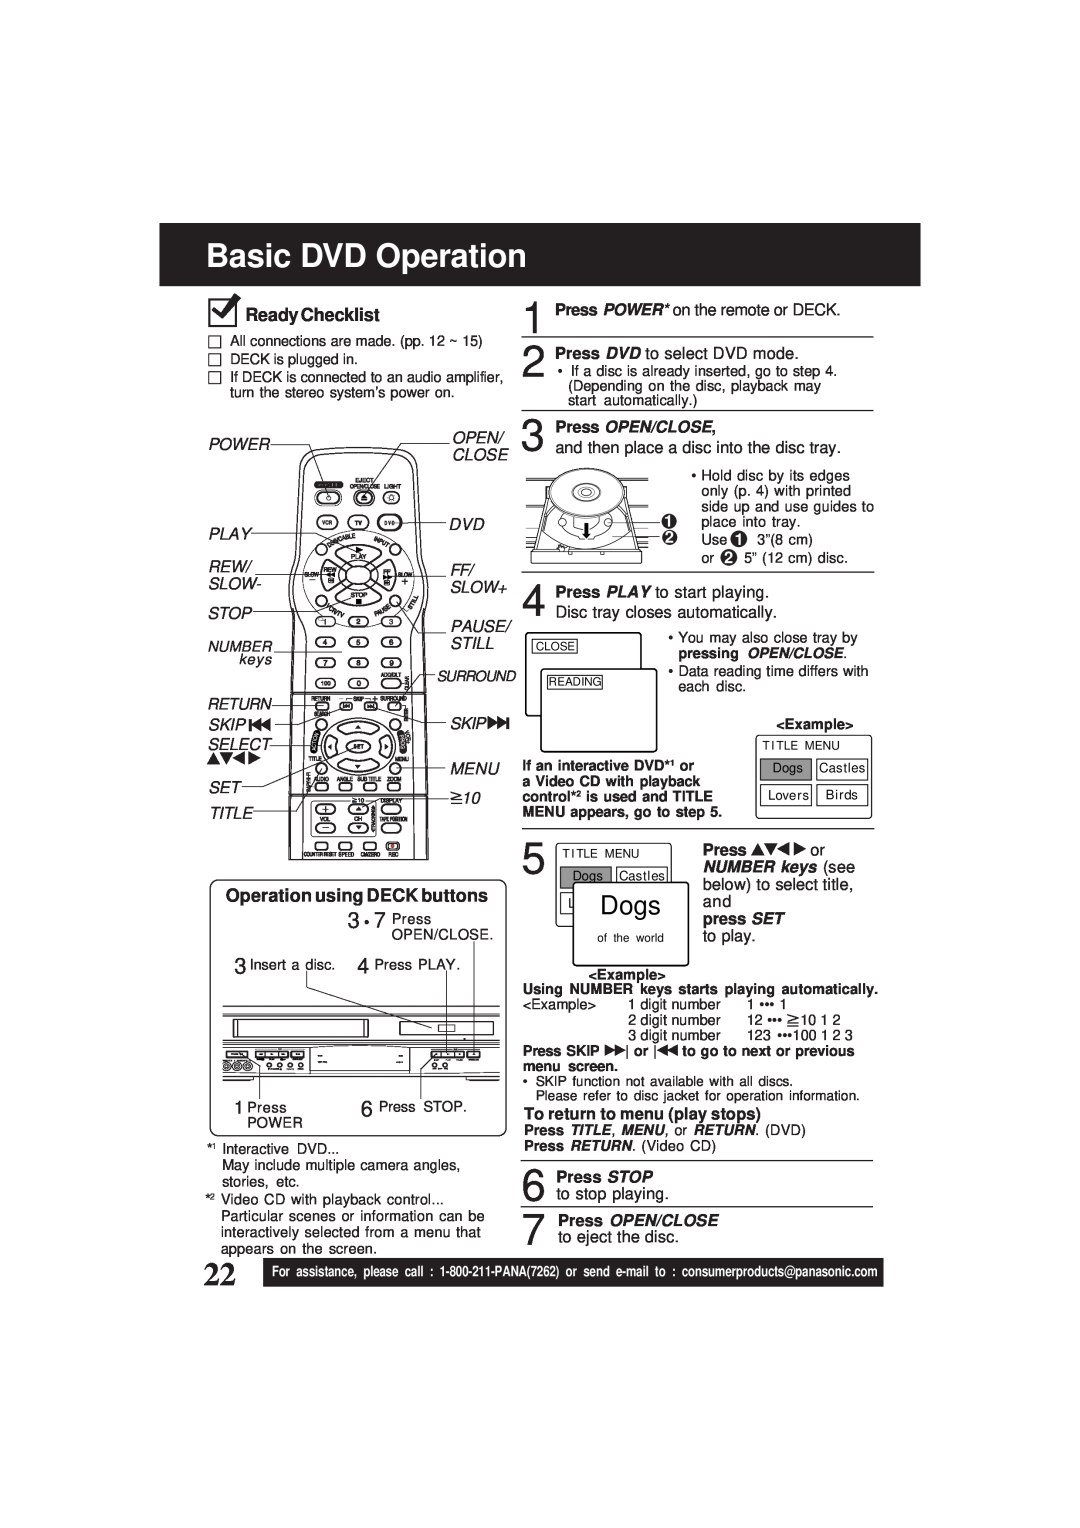 Panasonic PV-D4761 Basic DVD Operation, Ready Checklist, Operation using DECK buttons, Press, below to select title 